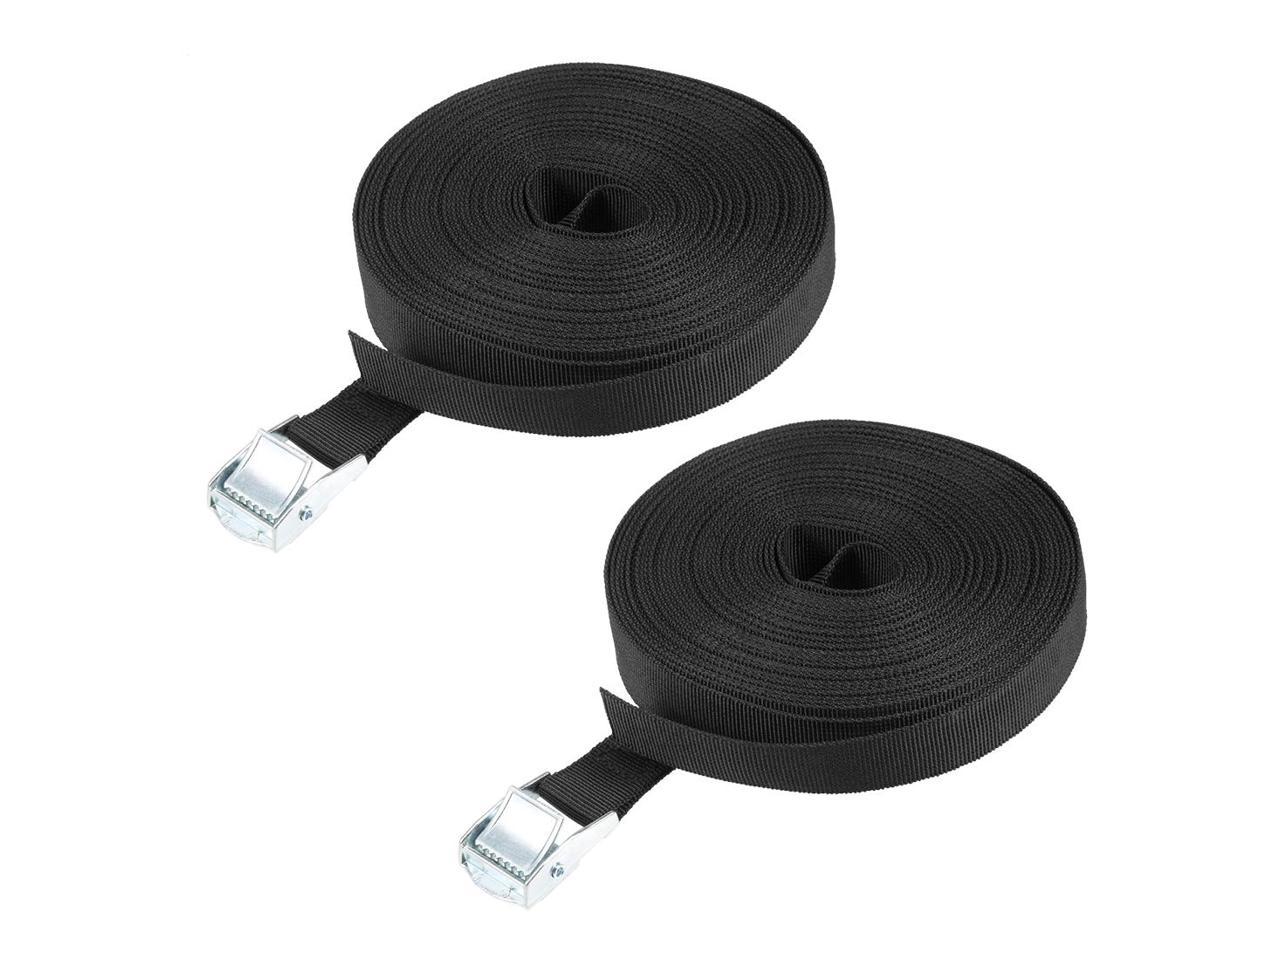 11M x 25mm Cargo Mooring Strap Mooring Straps with cam Lock Buckle 250Kg Workload 2 Pieces Blue 